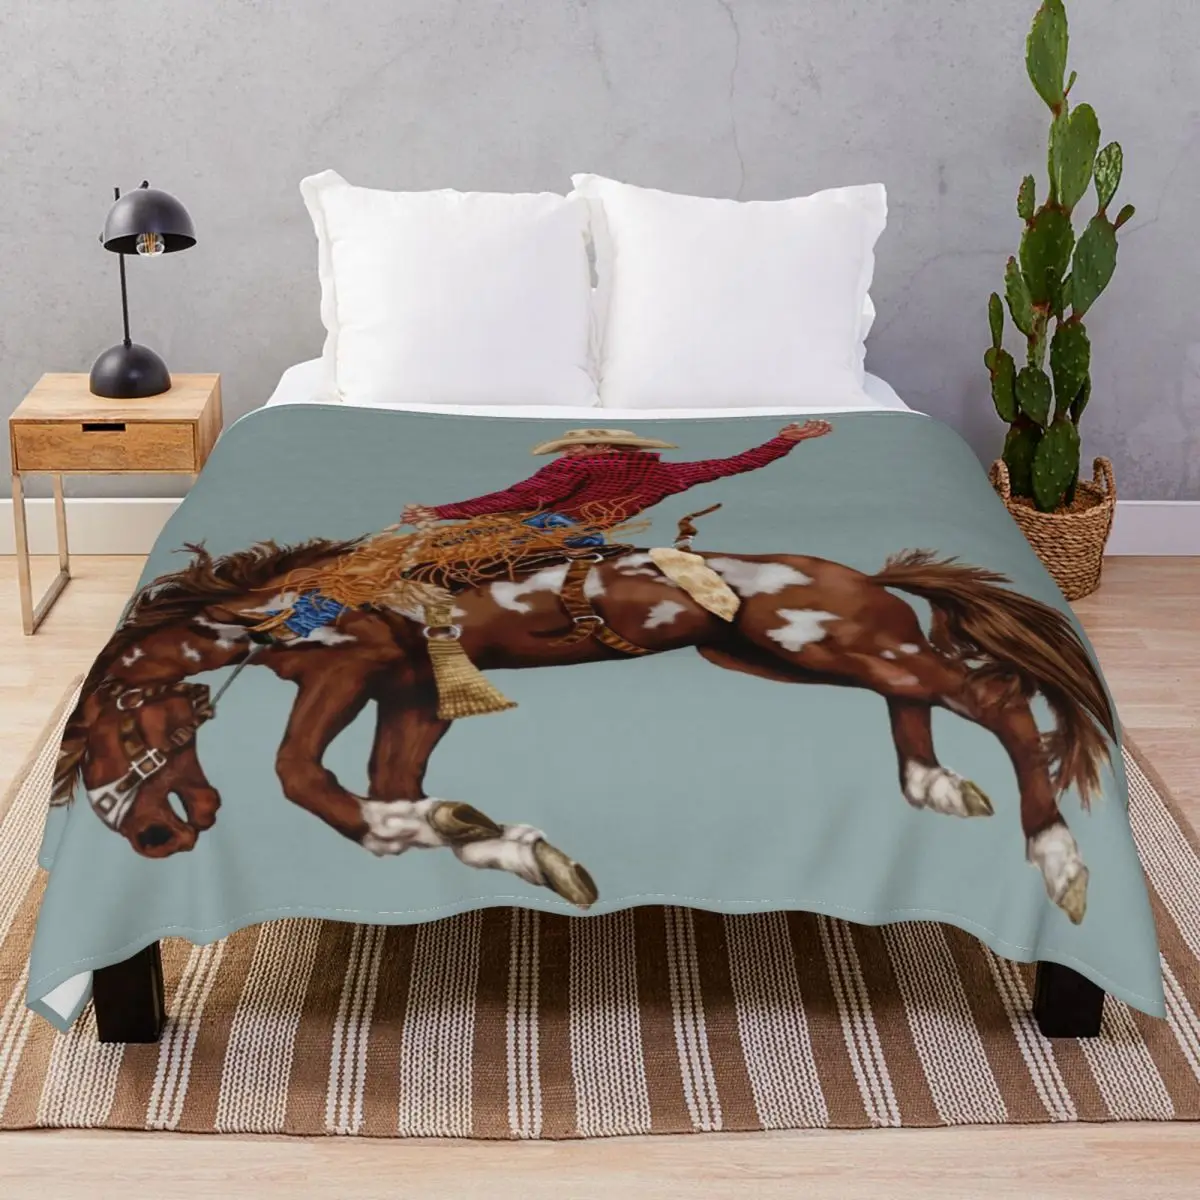 Vintage Rodeo Cowboy Blankets Flannel Autumn Multifunction Throw Blanket for Bed Home Couch Travel Office